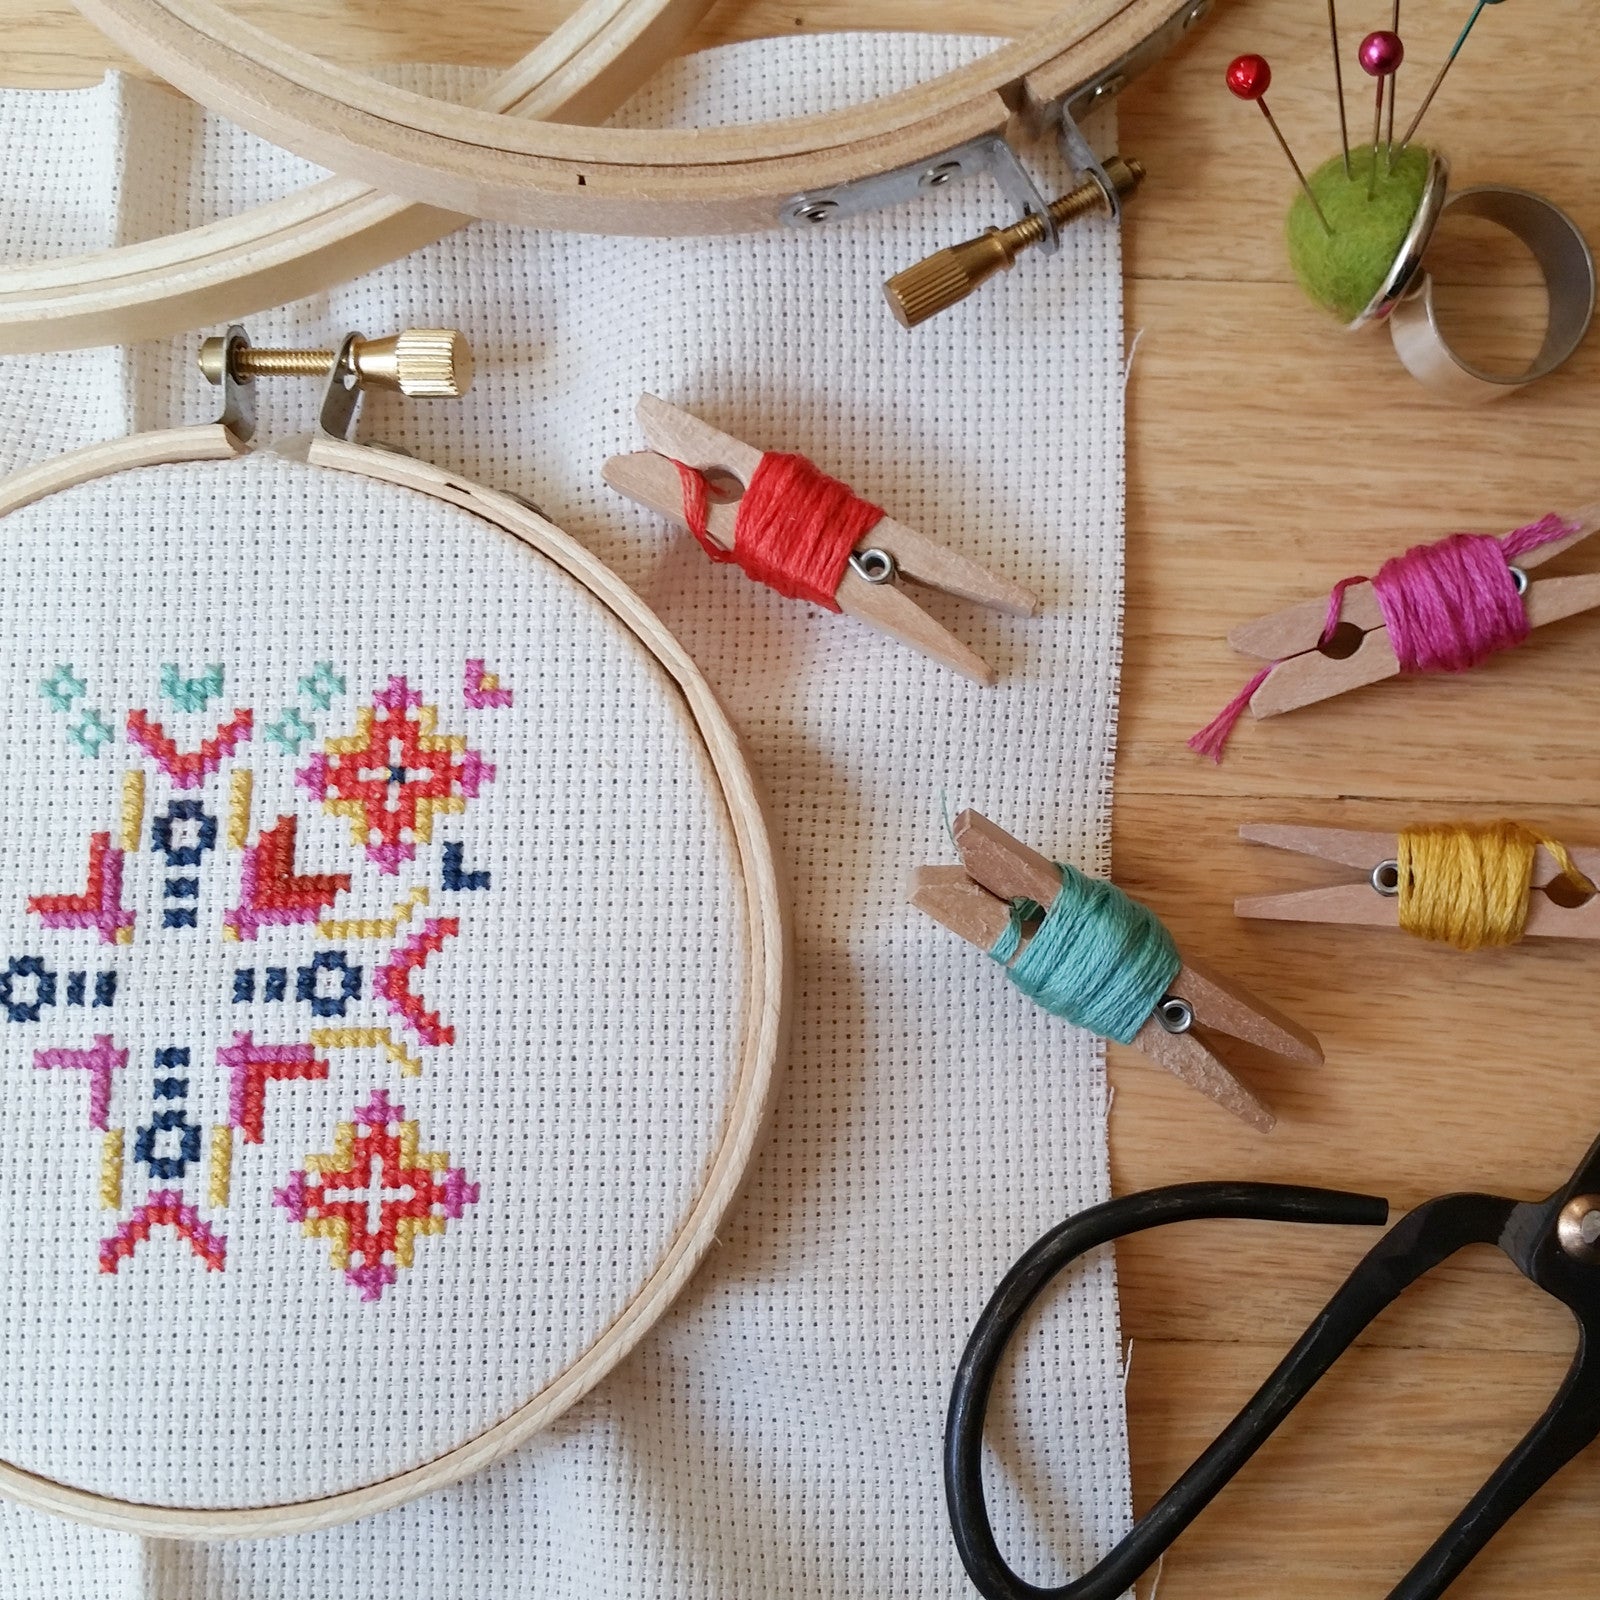 A beginner's guide to cross stitch